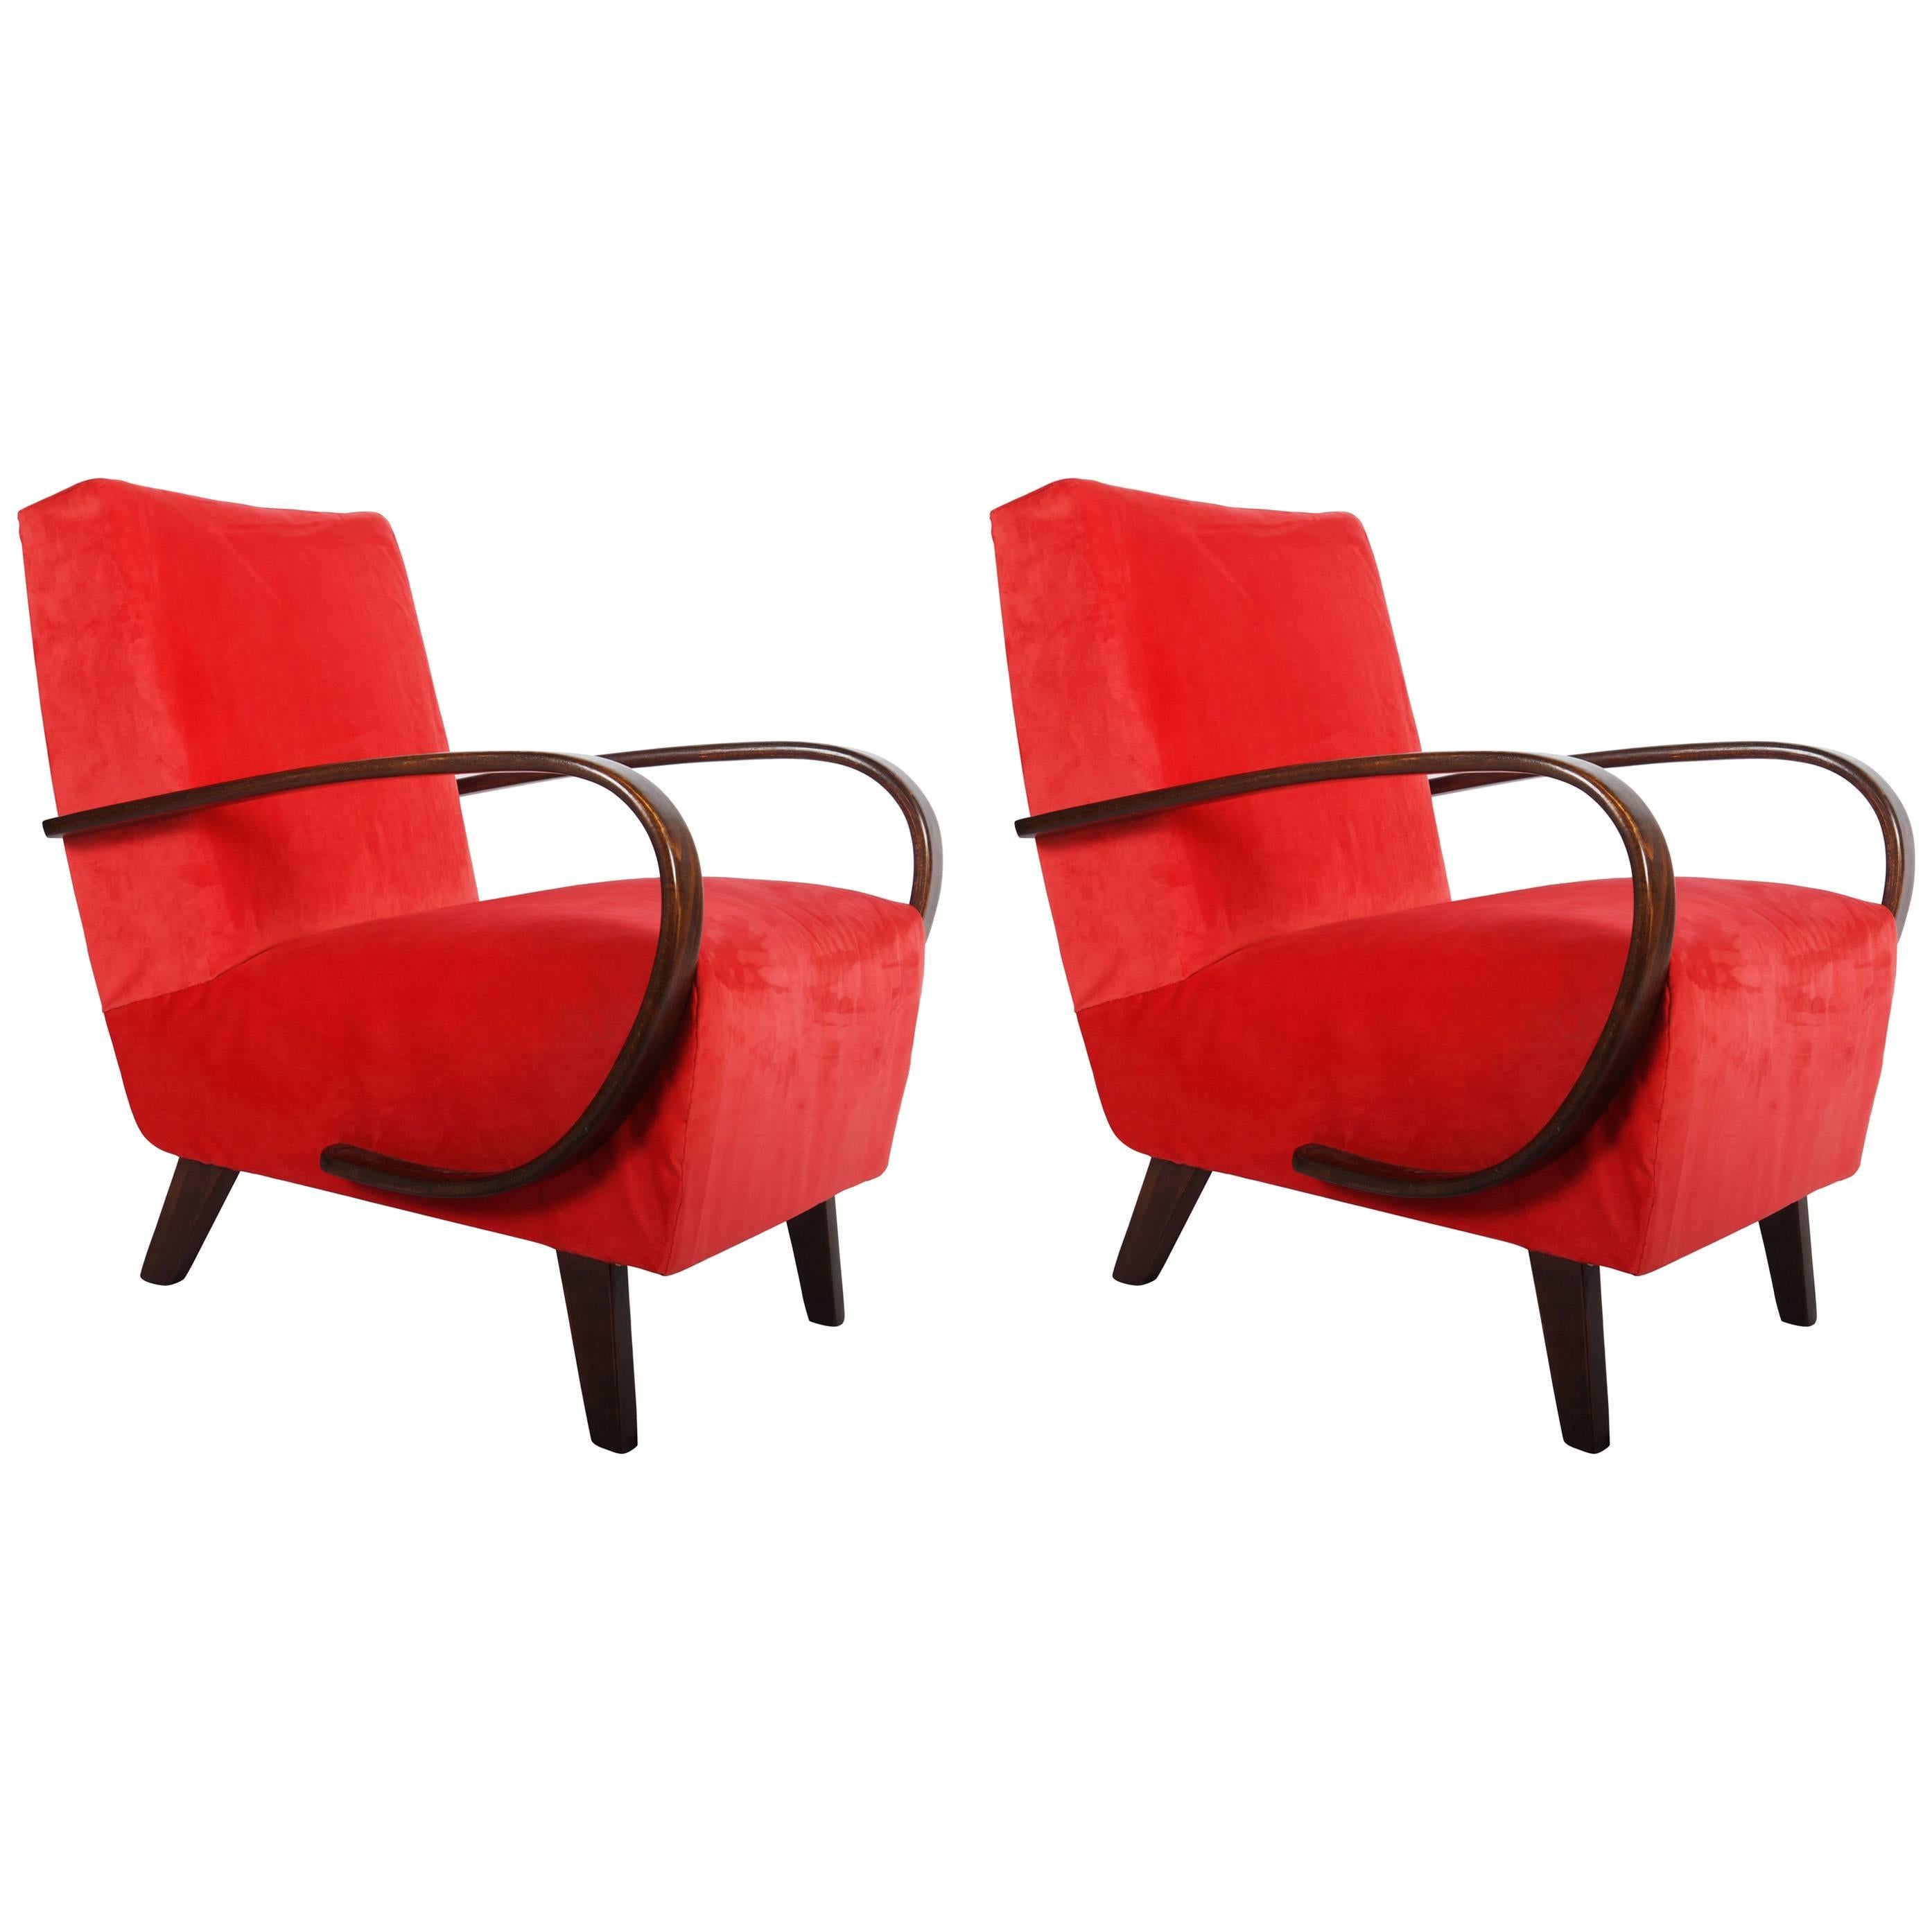 Pair of Midcentury Armchairs by Jindrich Halabala For Sale